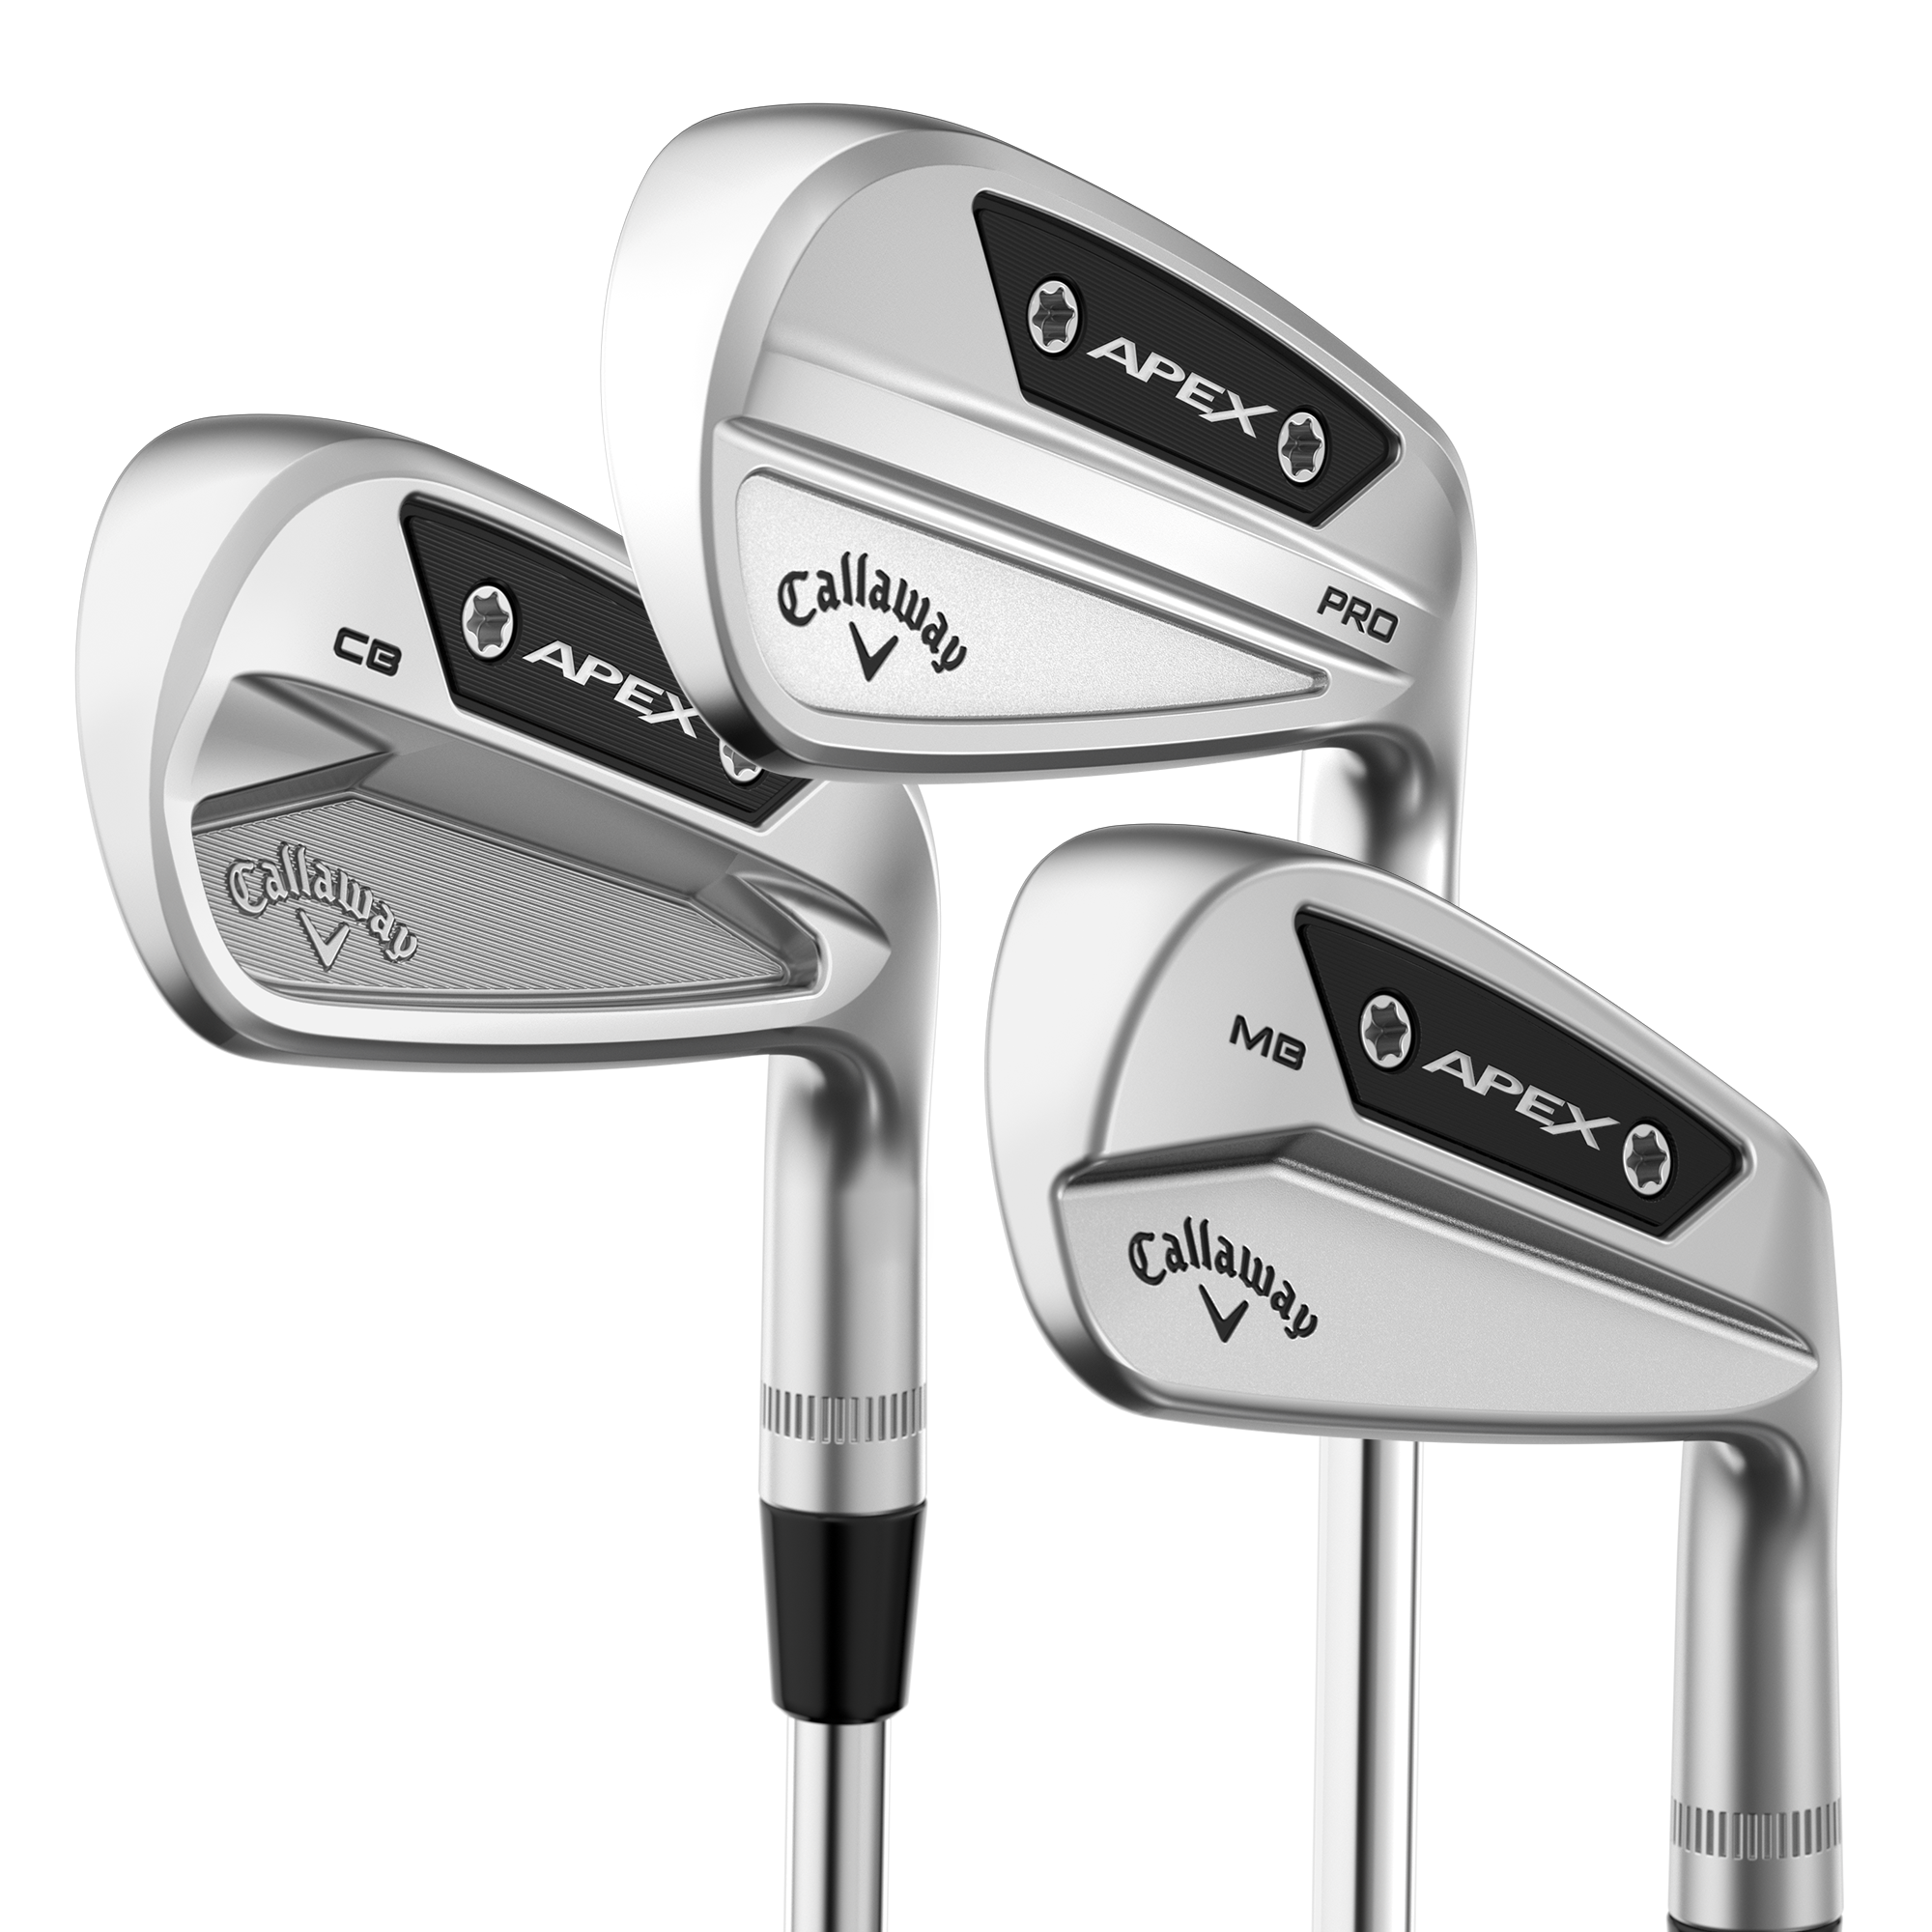 Callaway Apex Pro series irons: What you need to know | Golf